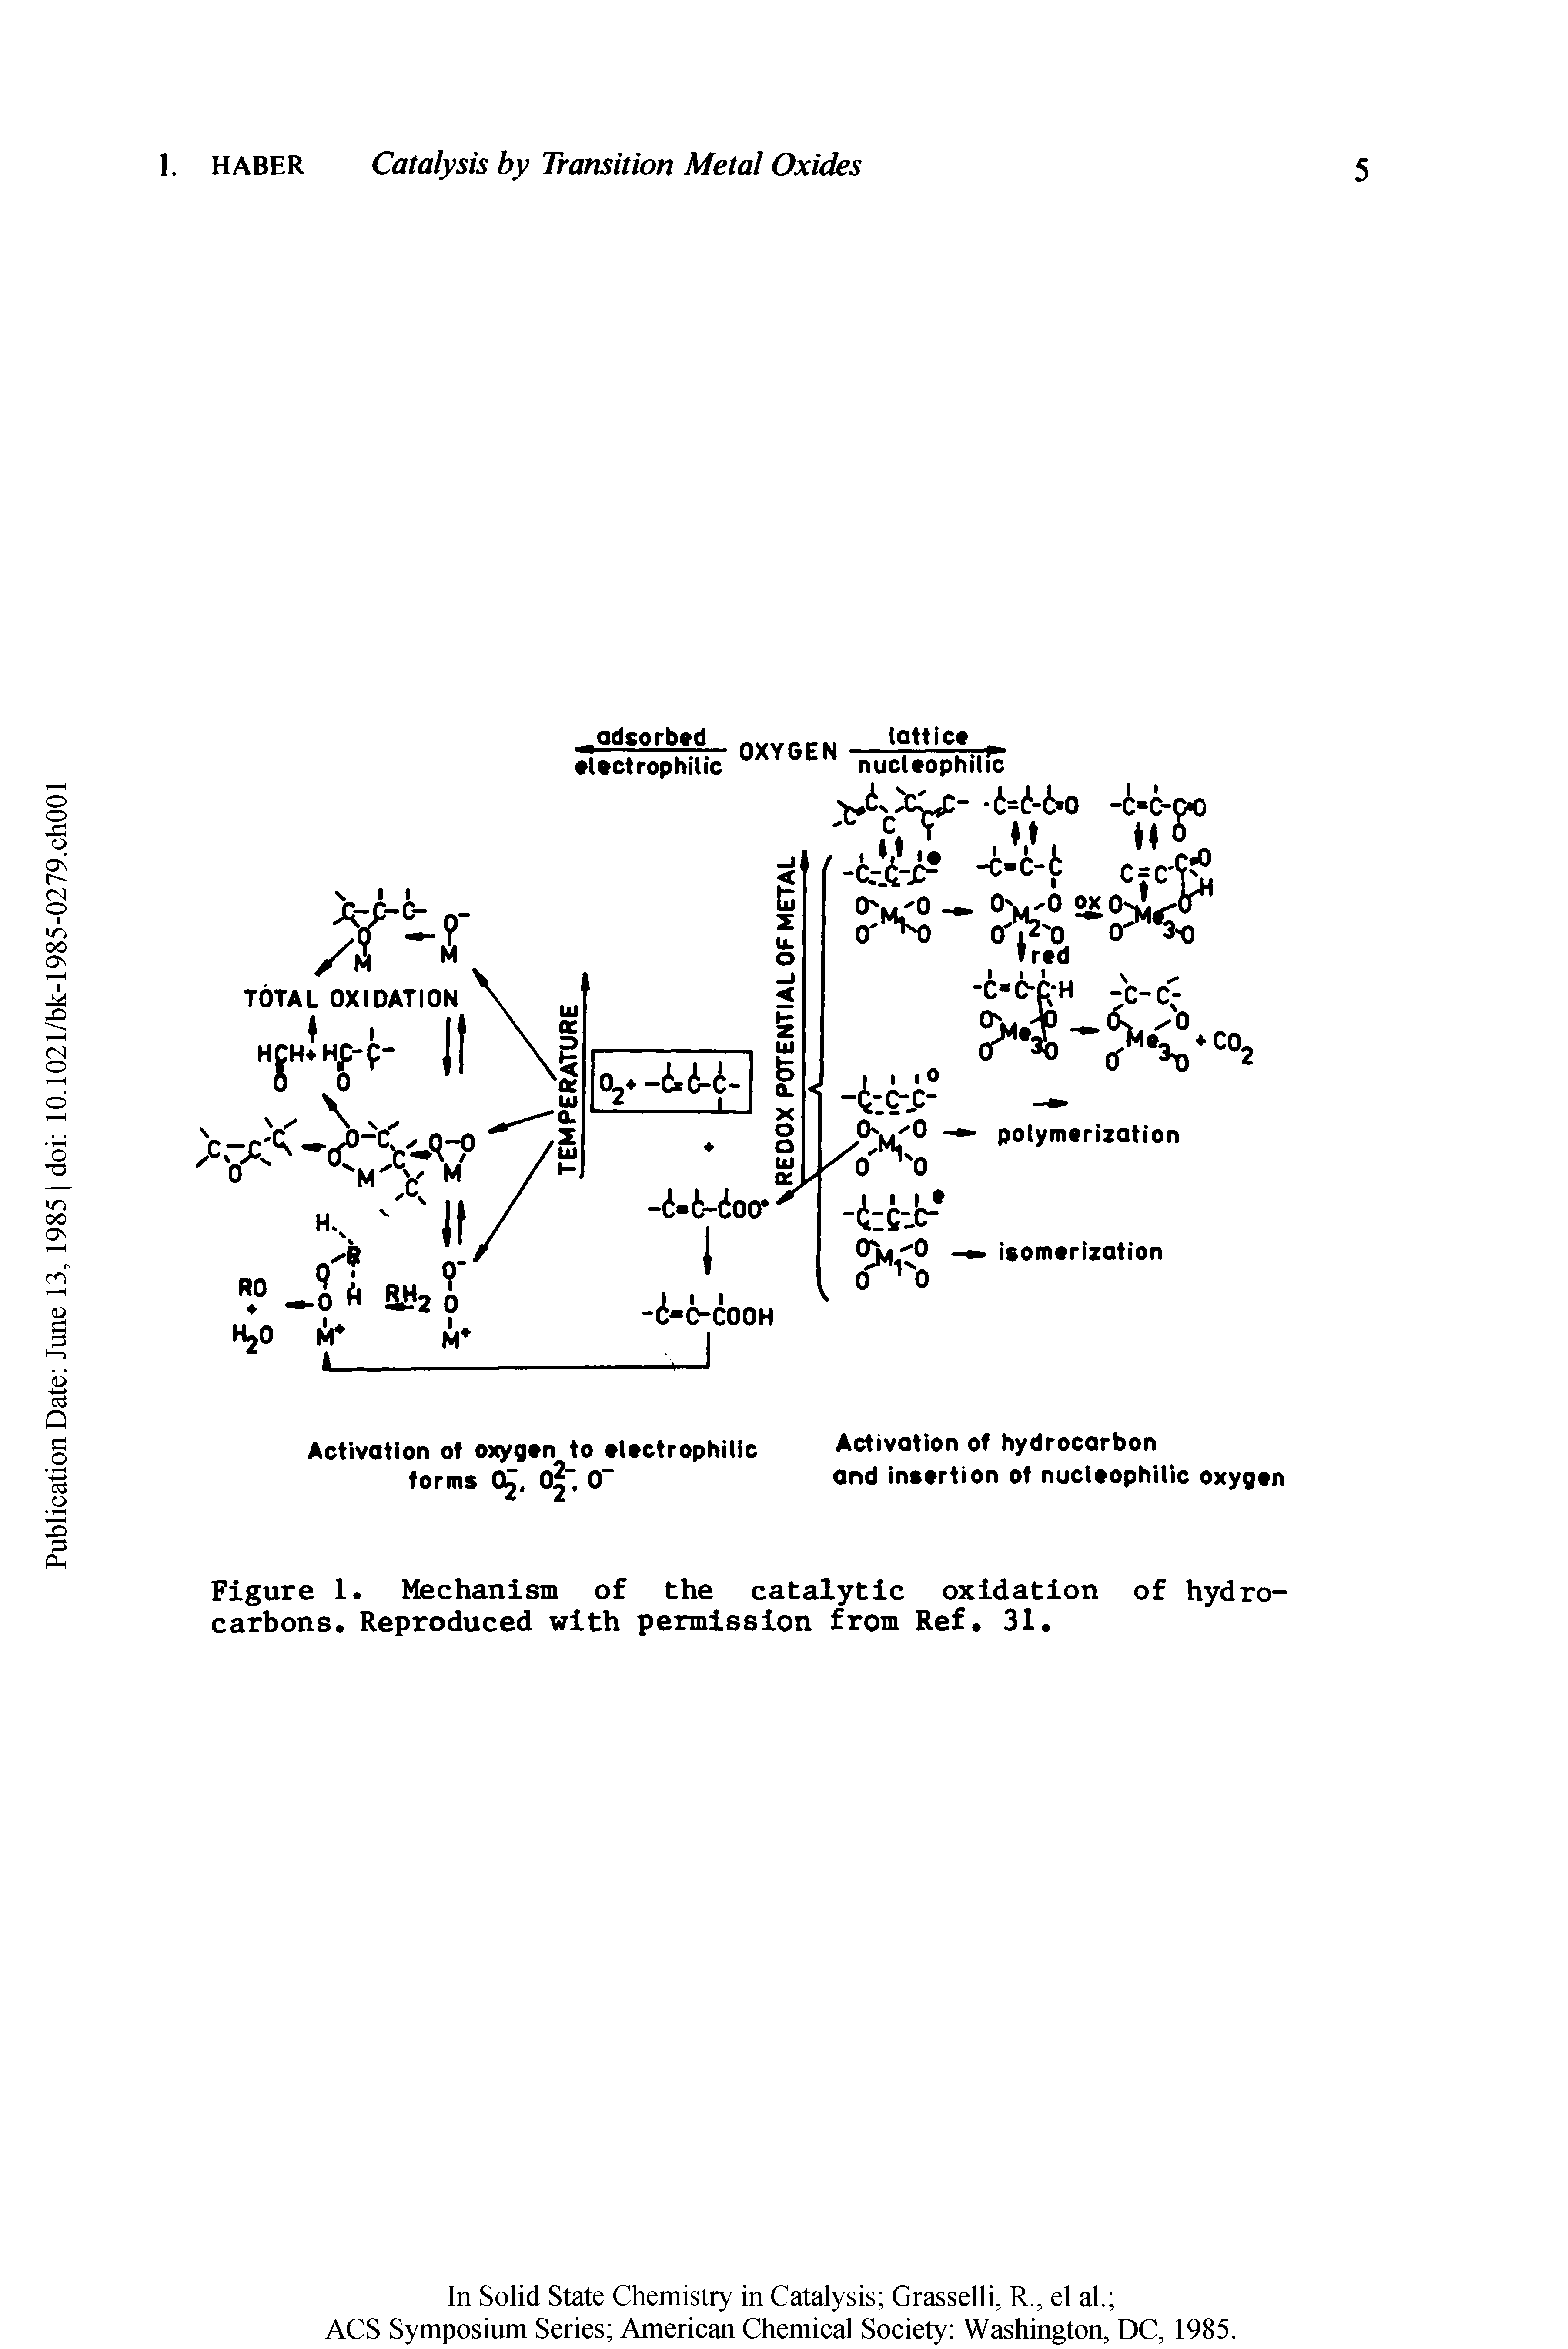 Figure 1. Mechanism of the catalytic oxidation of hydrocarbons. Reproduced with permission from Ref. 31.